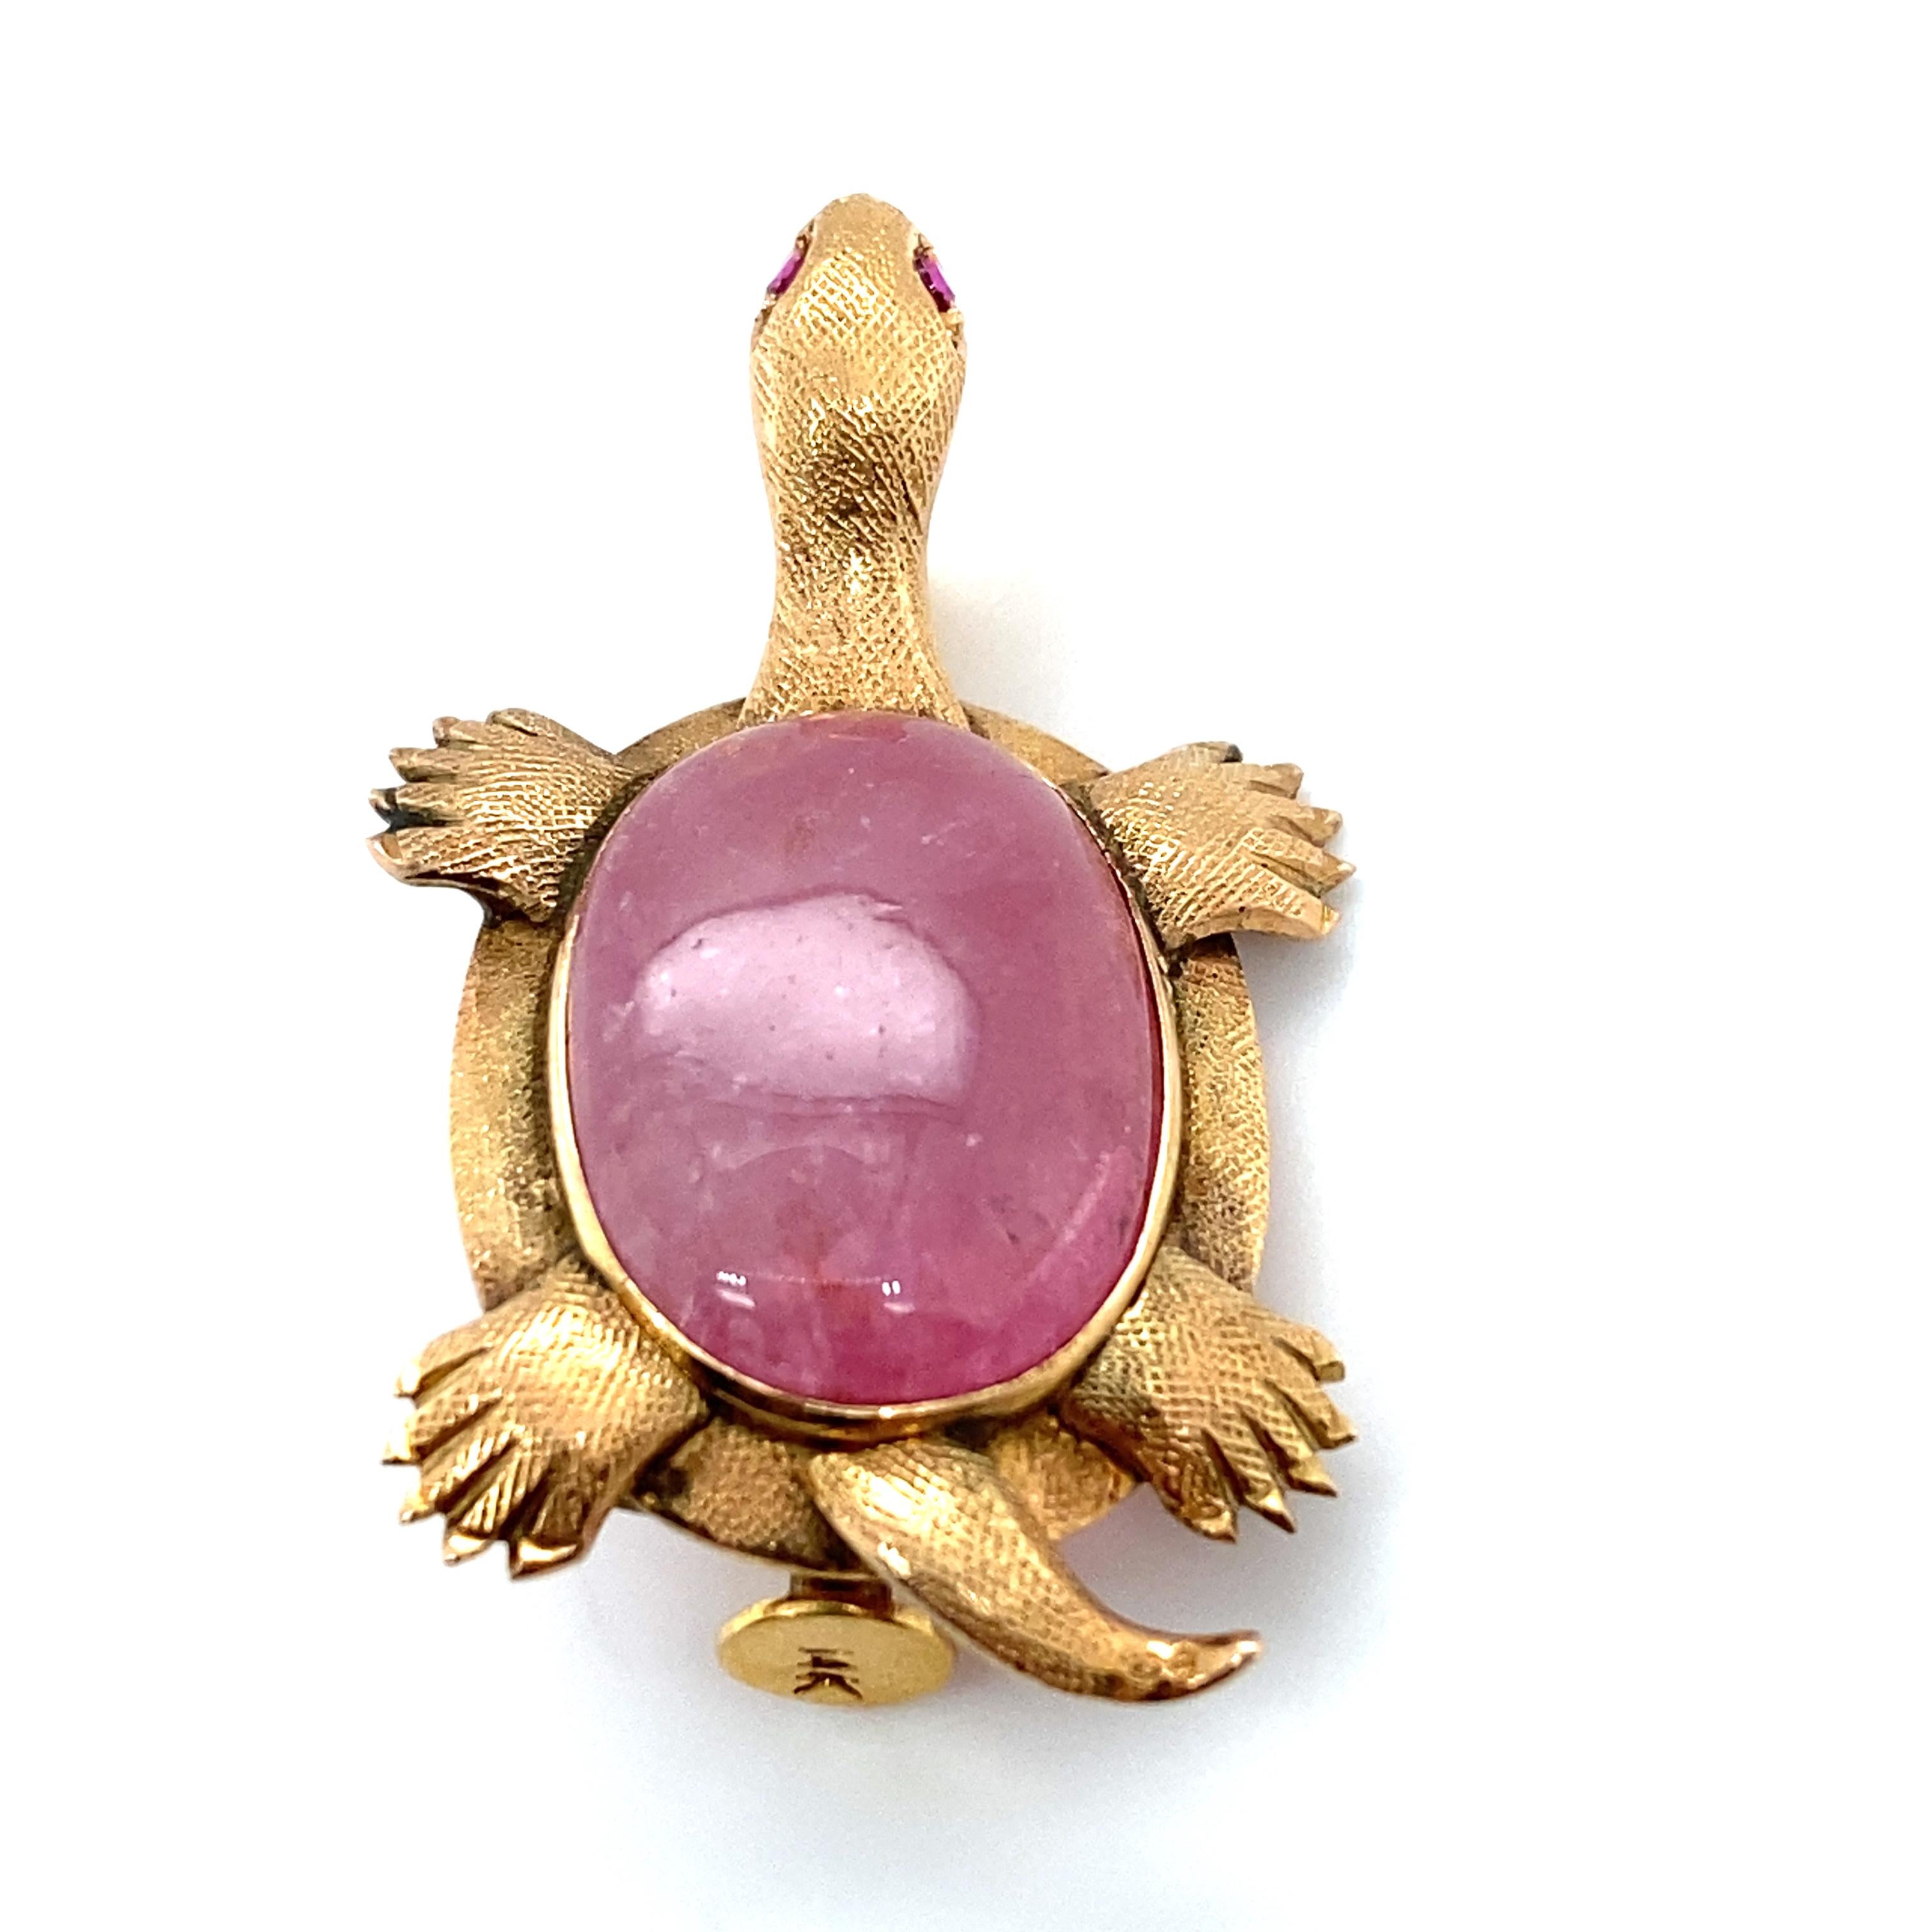 Item Details: This whimsical turtle brooch has a large oval pink tourmaline and is made of brushed 14 karat gold. The eyes are set with small rubies. It is the most beautiful turtle with the perfect hues of pink and gold perfectly accenting each